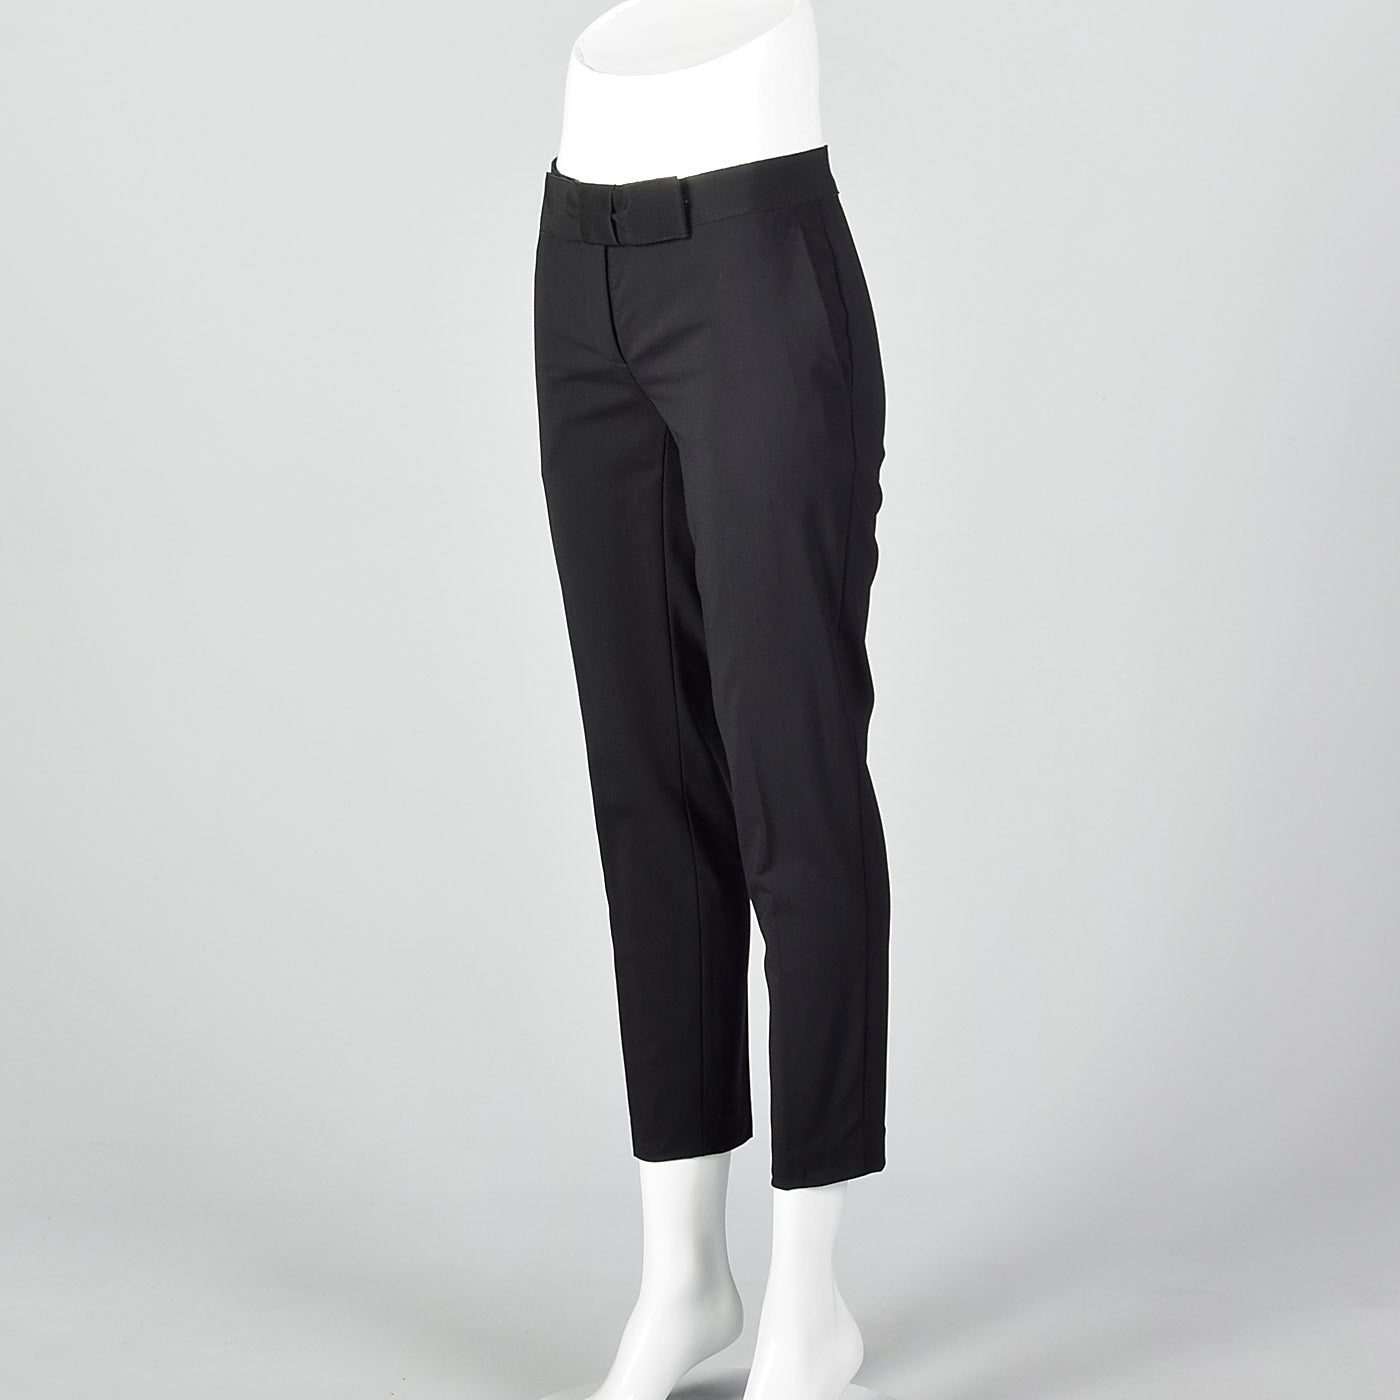 2000s Low Rise Black Pants with Bow Waist